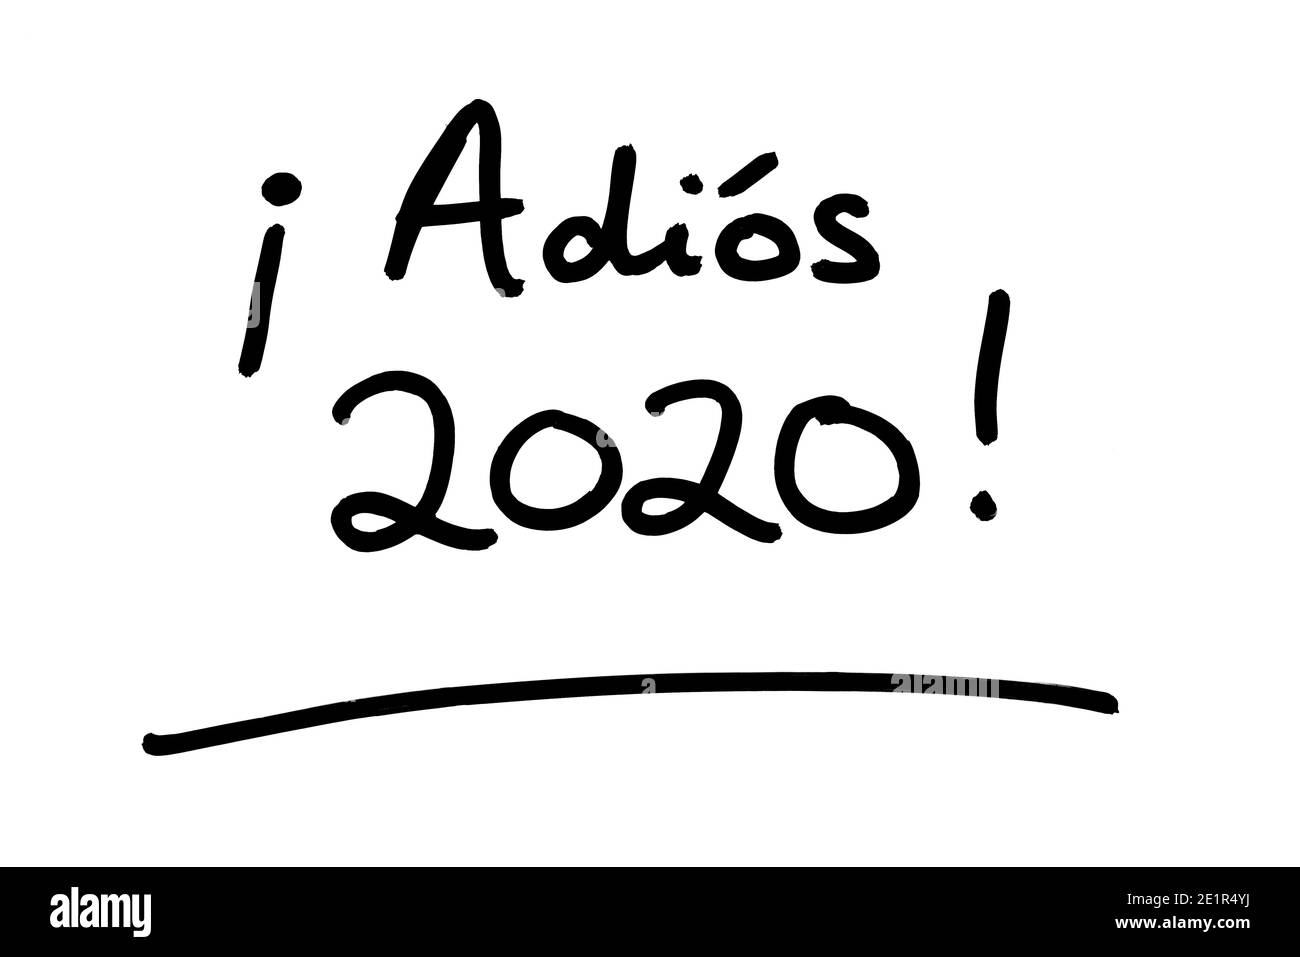 Adios 2020! - meaning Goodbye 2020! in the Spanish language - handwritten on a white background. Stock Photo